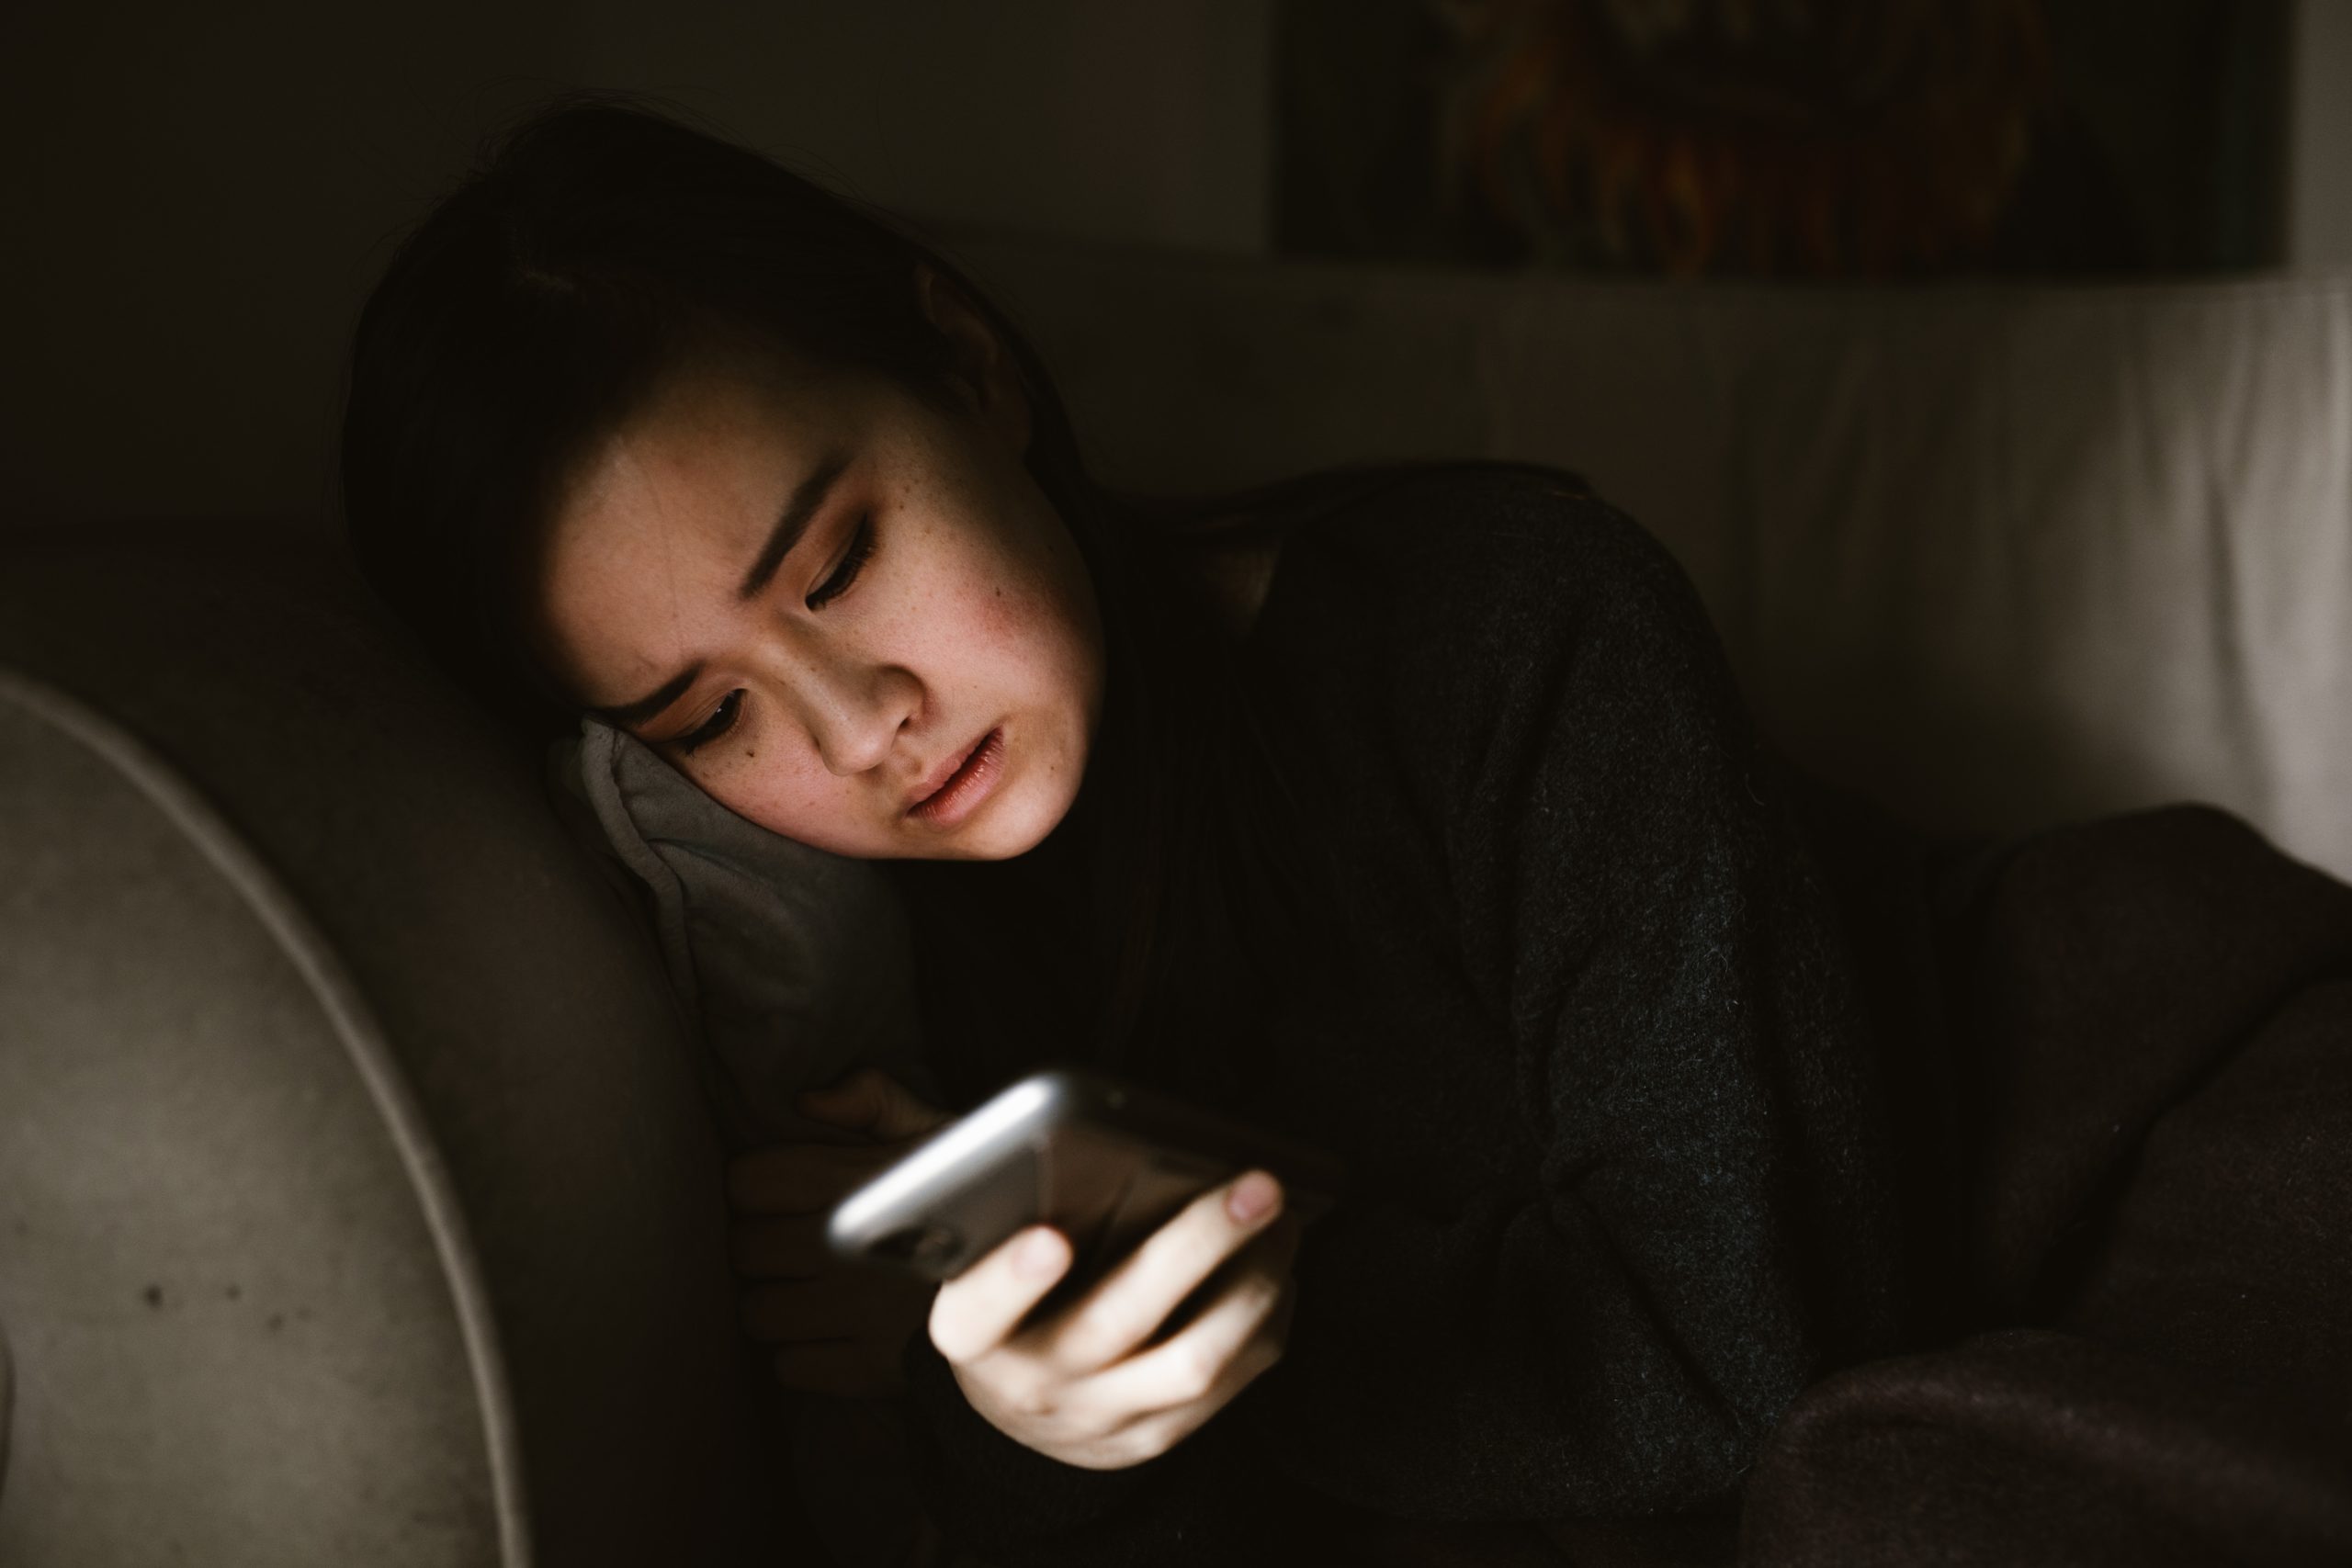 Girl lying on a couch looking in distress on her phone